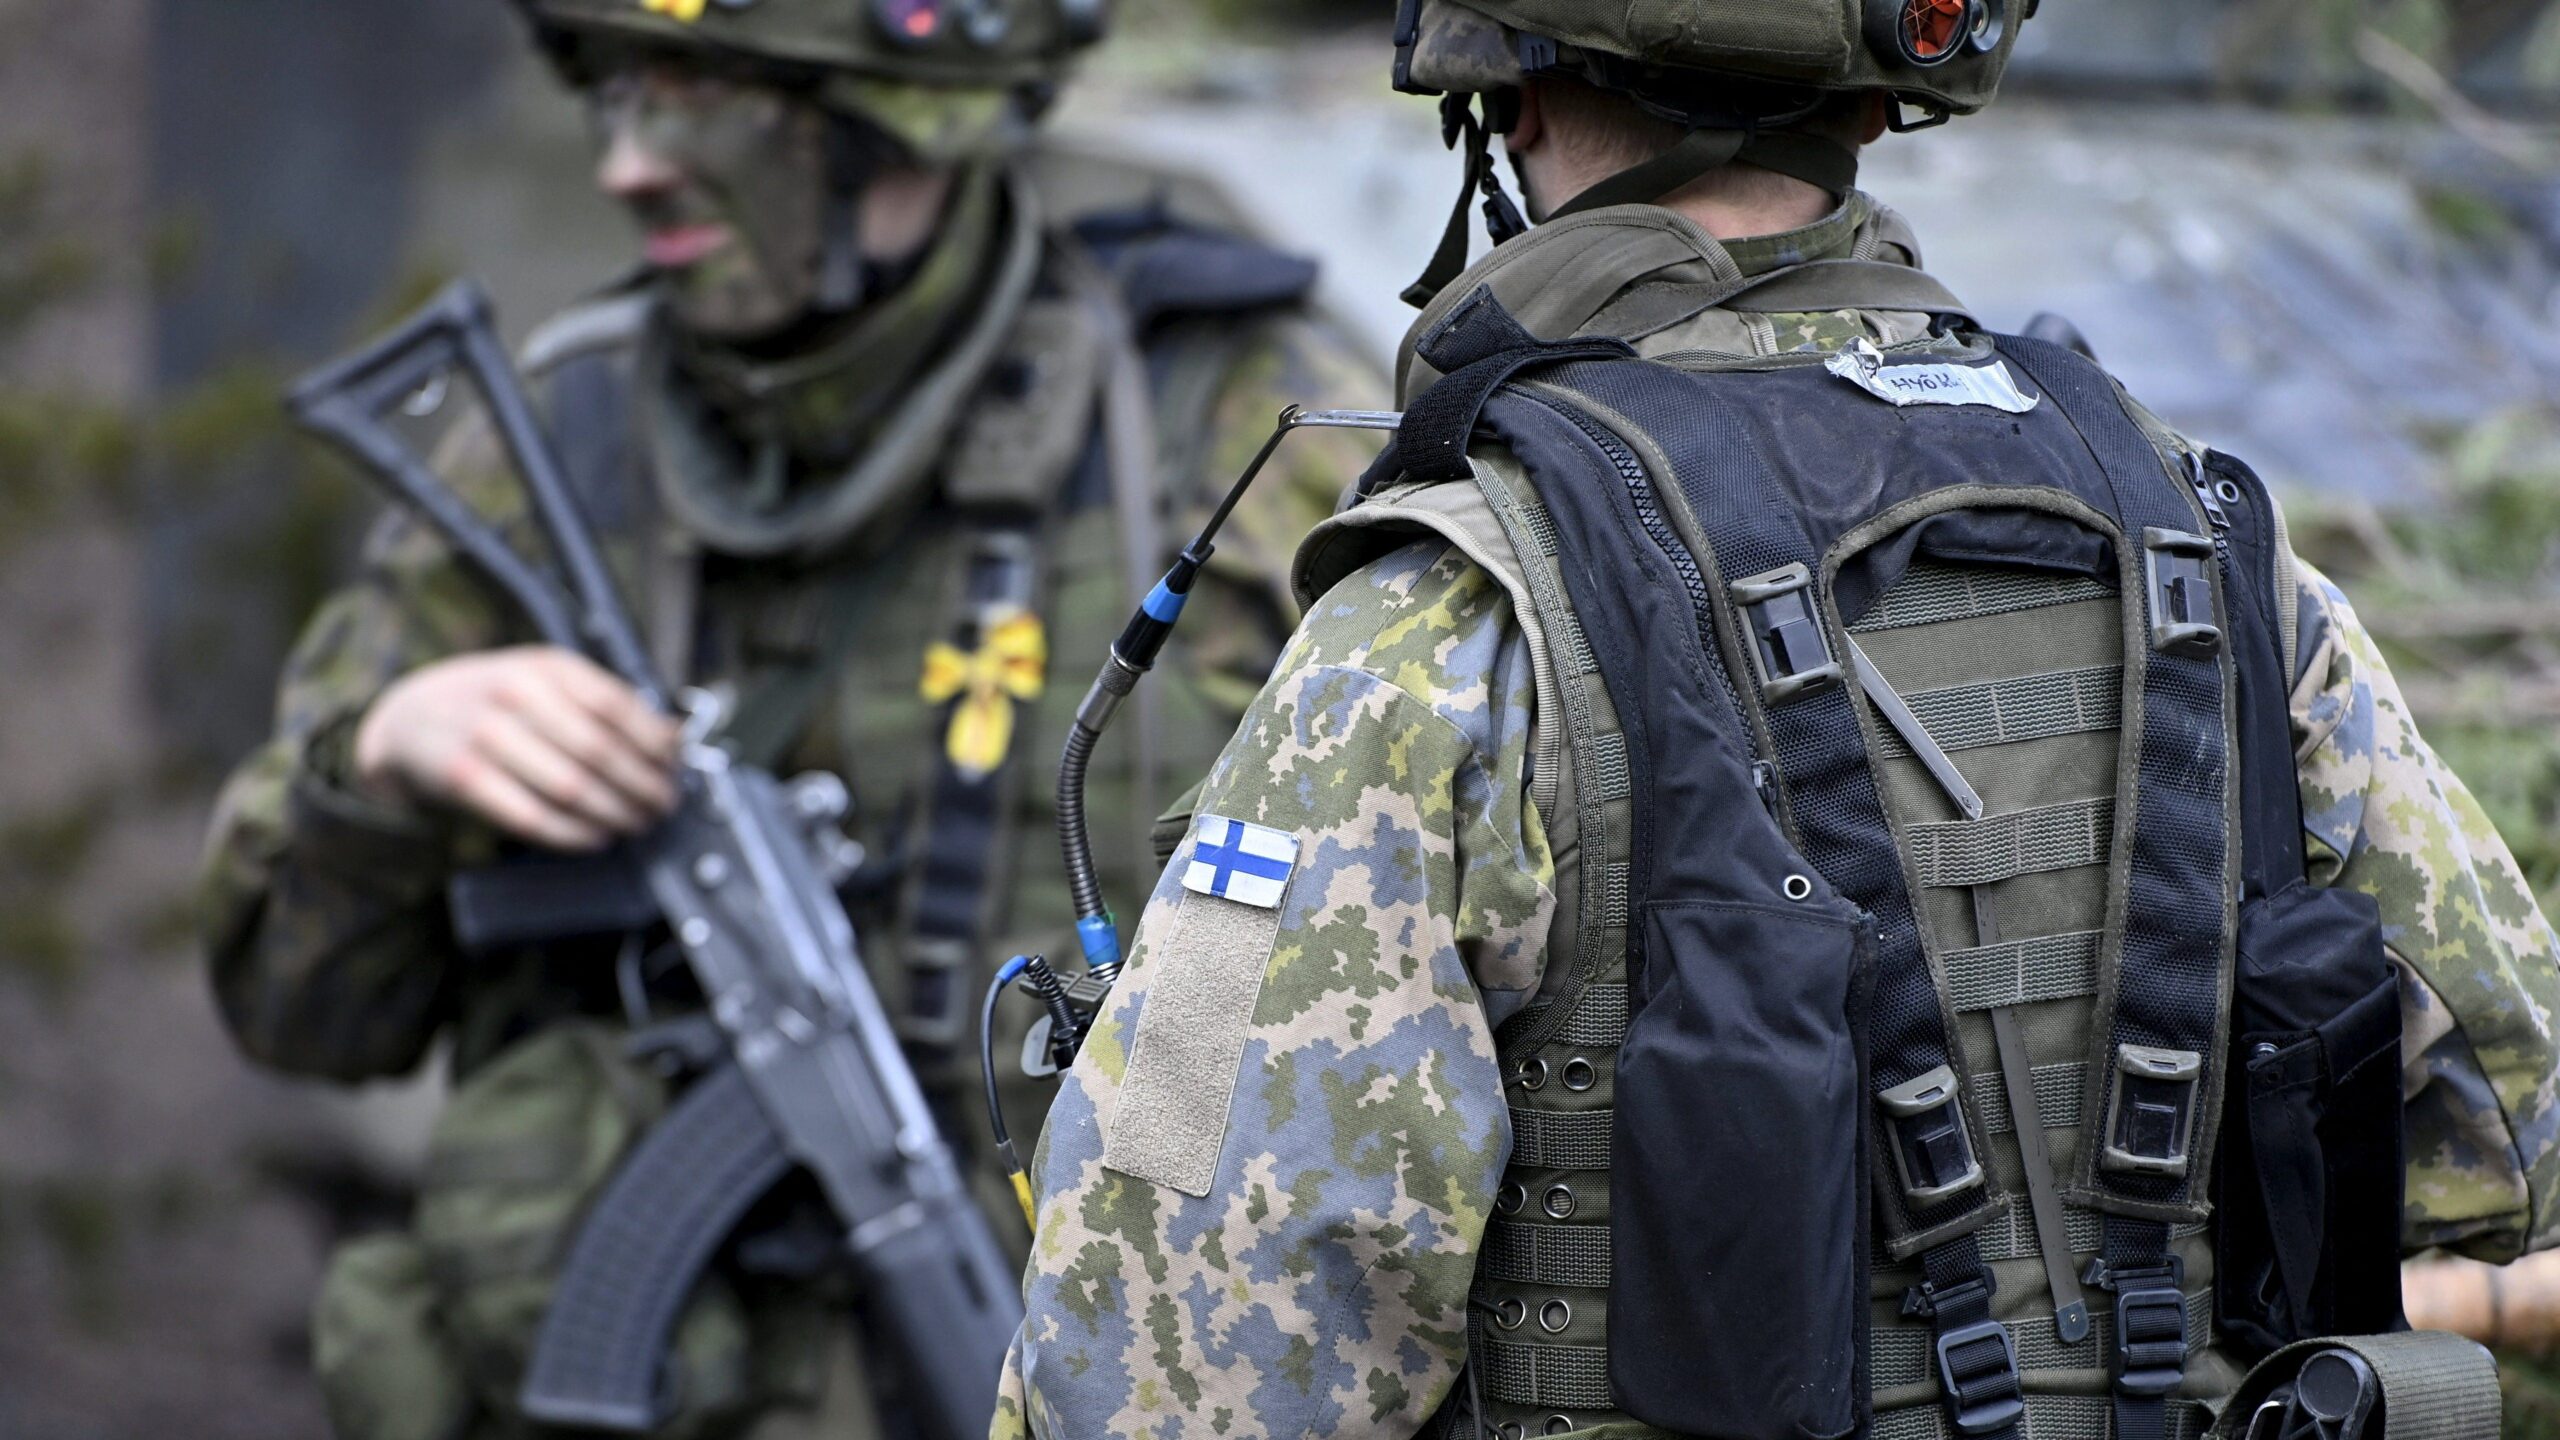 New NATO trick: Finland stores equipment in Norway, spurred by Russia’s range